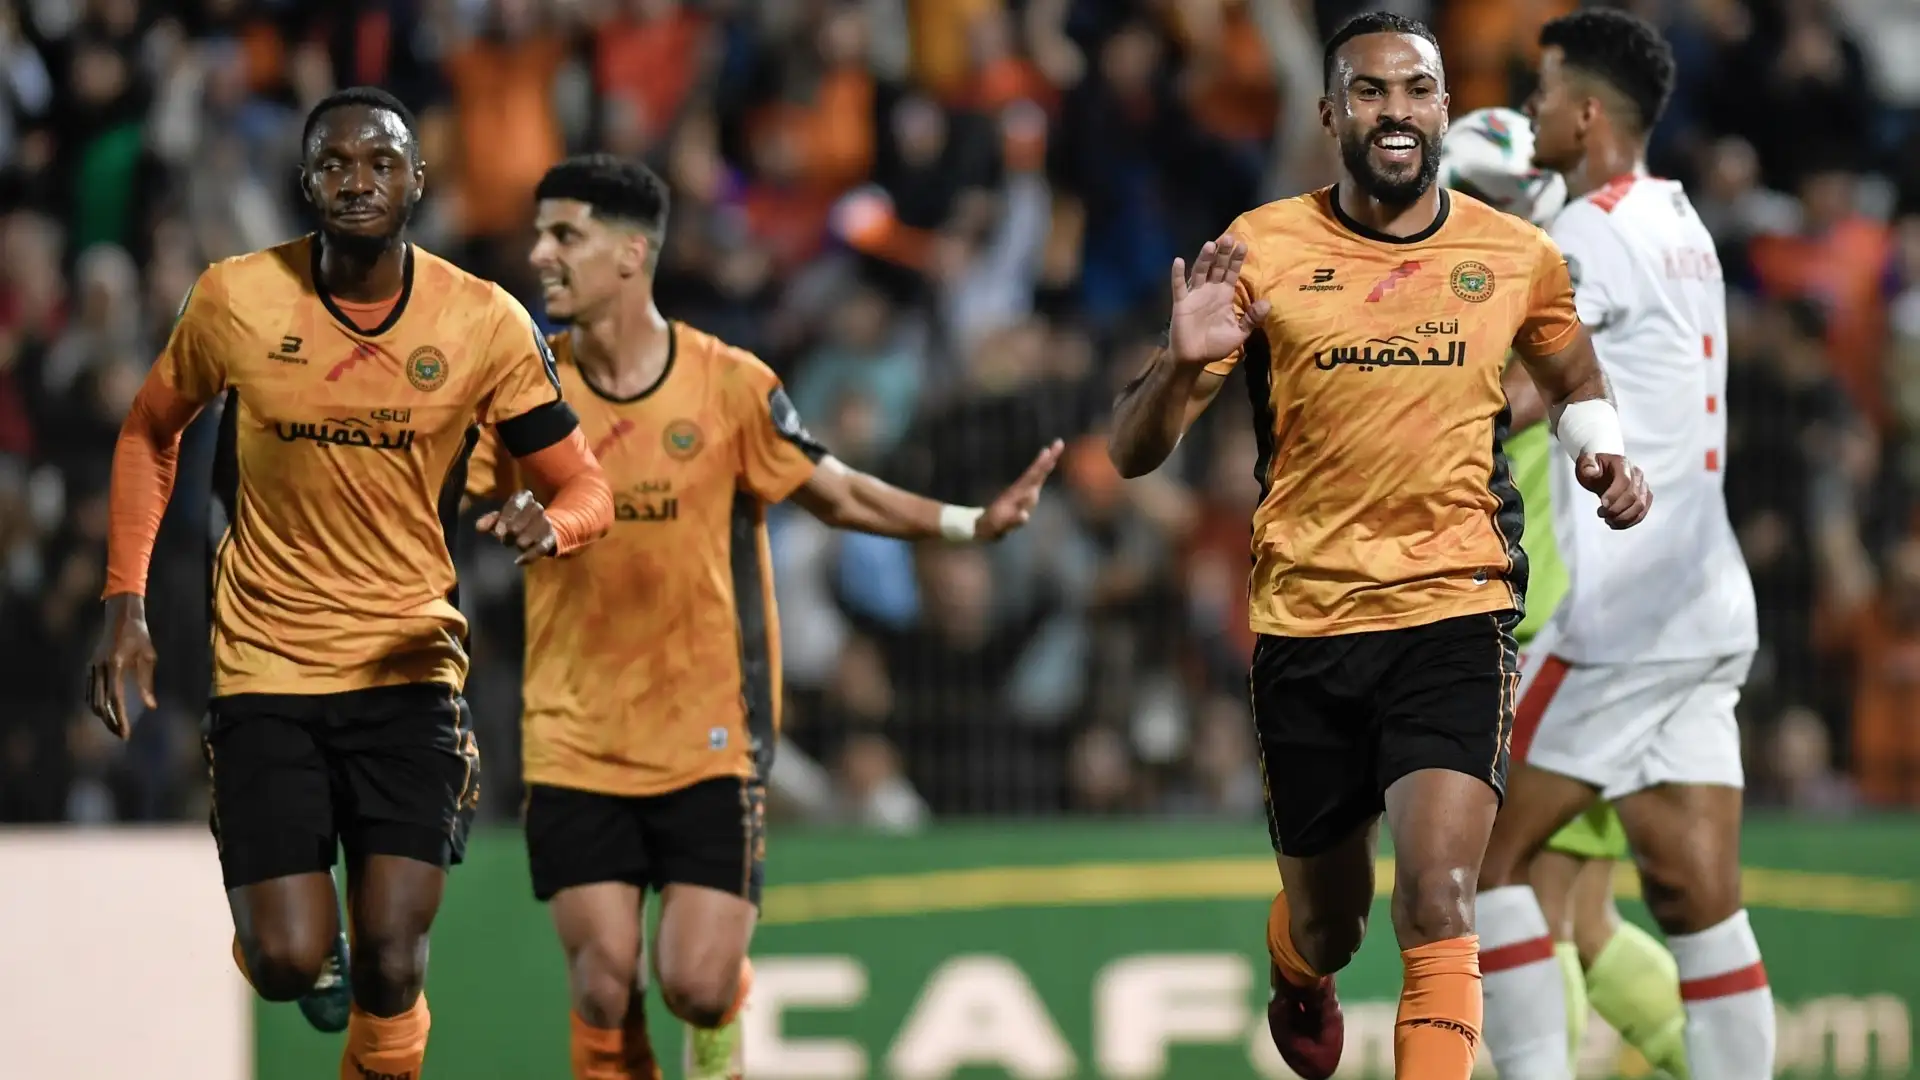 Caf Confederation Cup: RS Berkane on brink of third title after narrow win over SC Zamalek